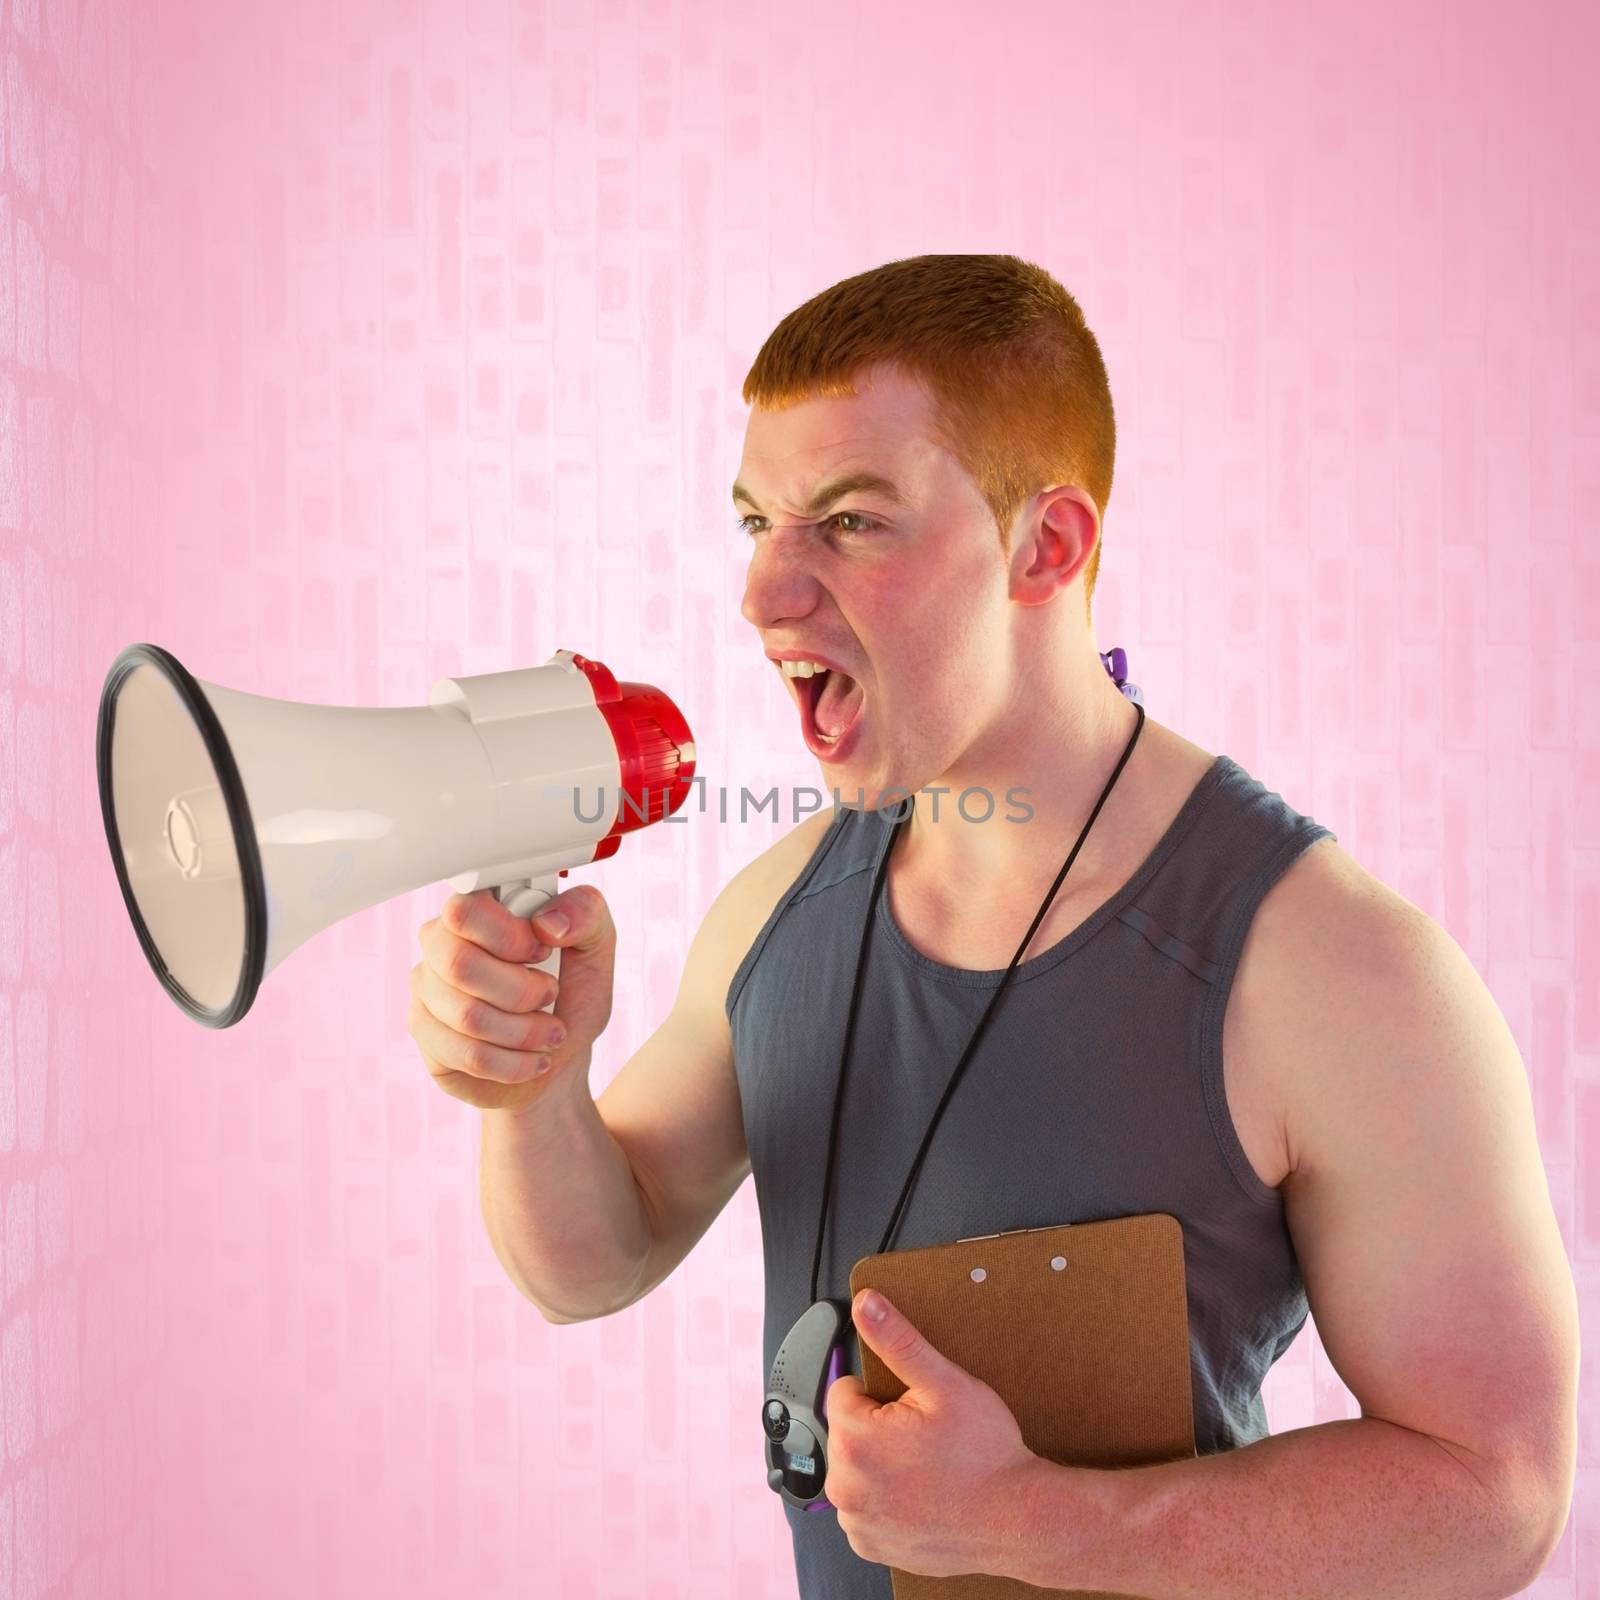 Angry personal trainer yelling through megaphone  against pink background